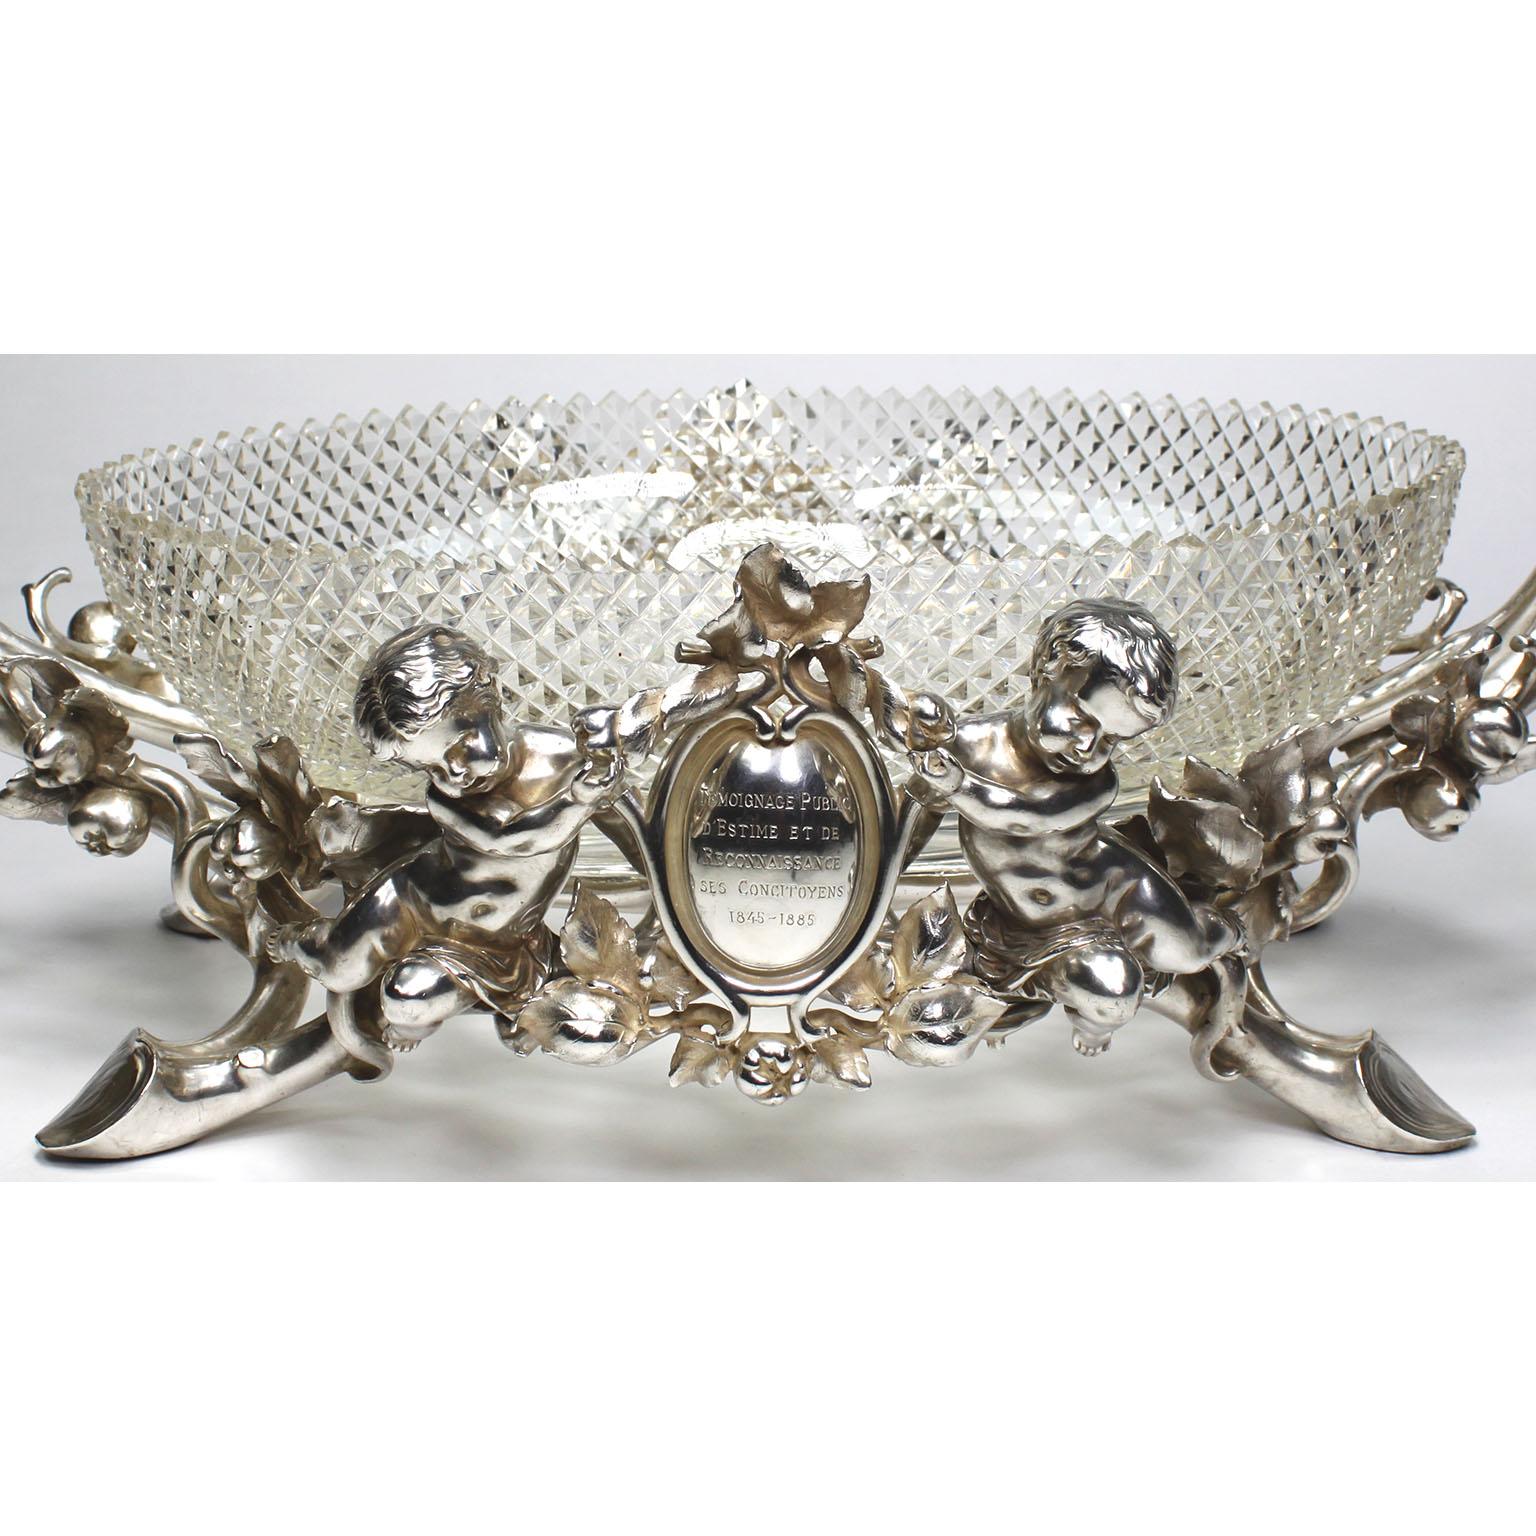 A very fine and palatial French 19th/20th century Christofle & Cie Louis XV style silvered figural centerpiece, fitted with an oval diamond-cut-glass center-dish, attributed to Baccarat, and flanked by two Putti (Children), all on a pomegranate